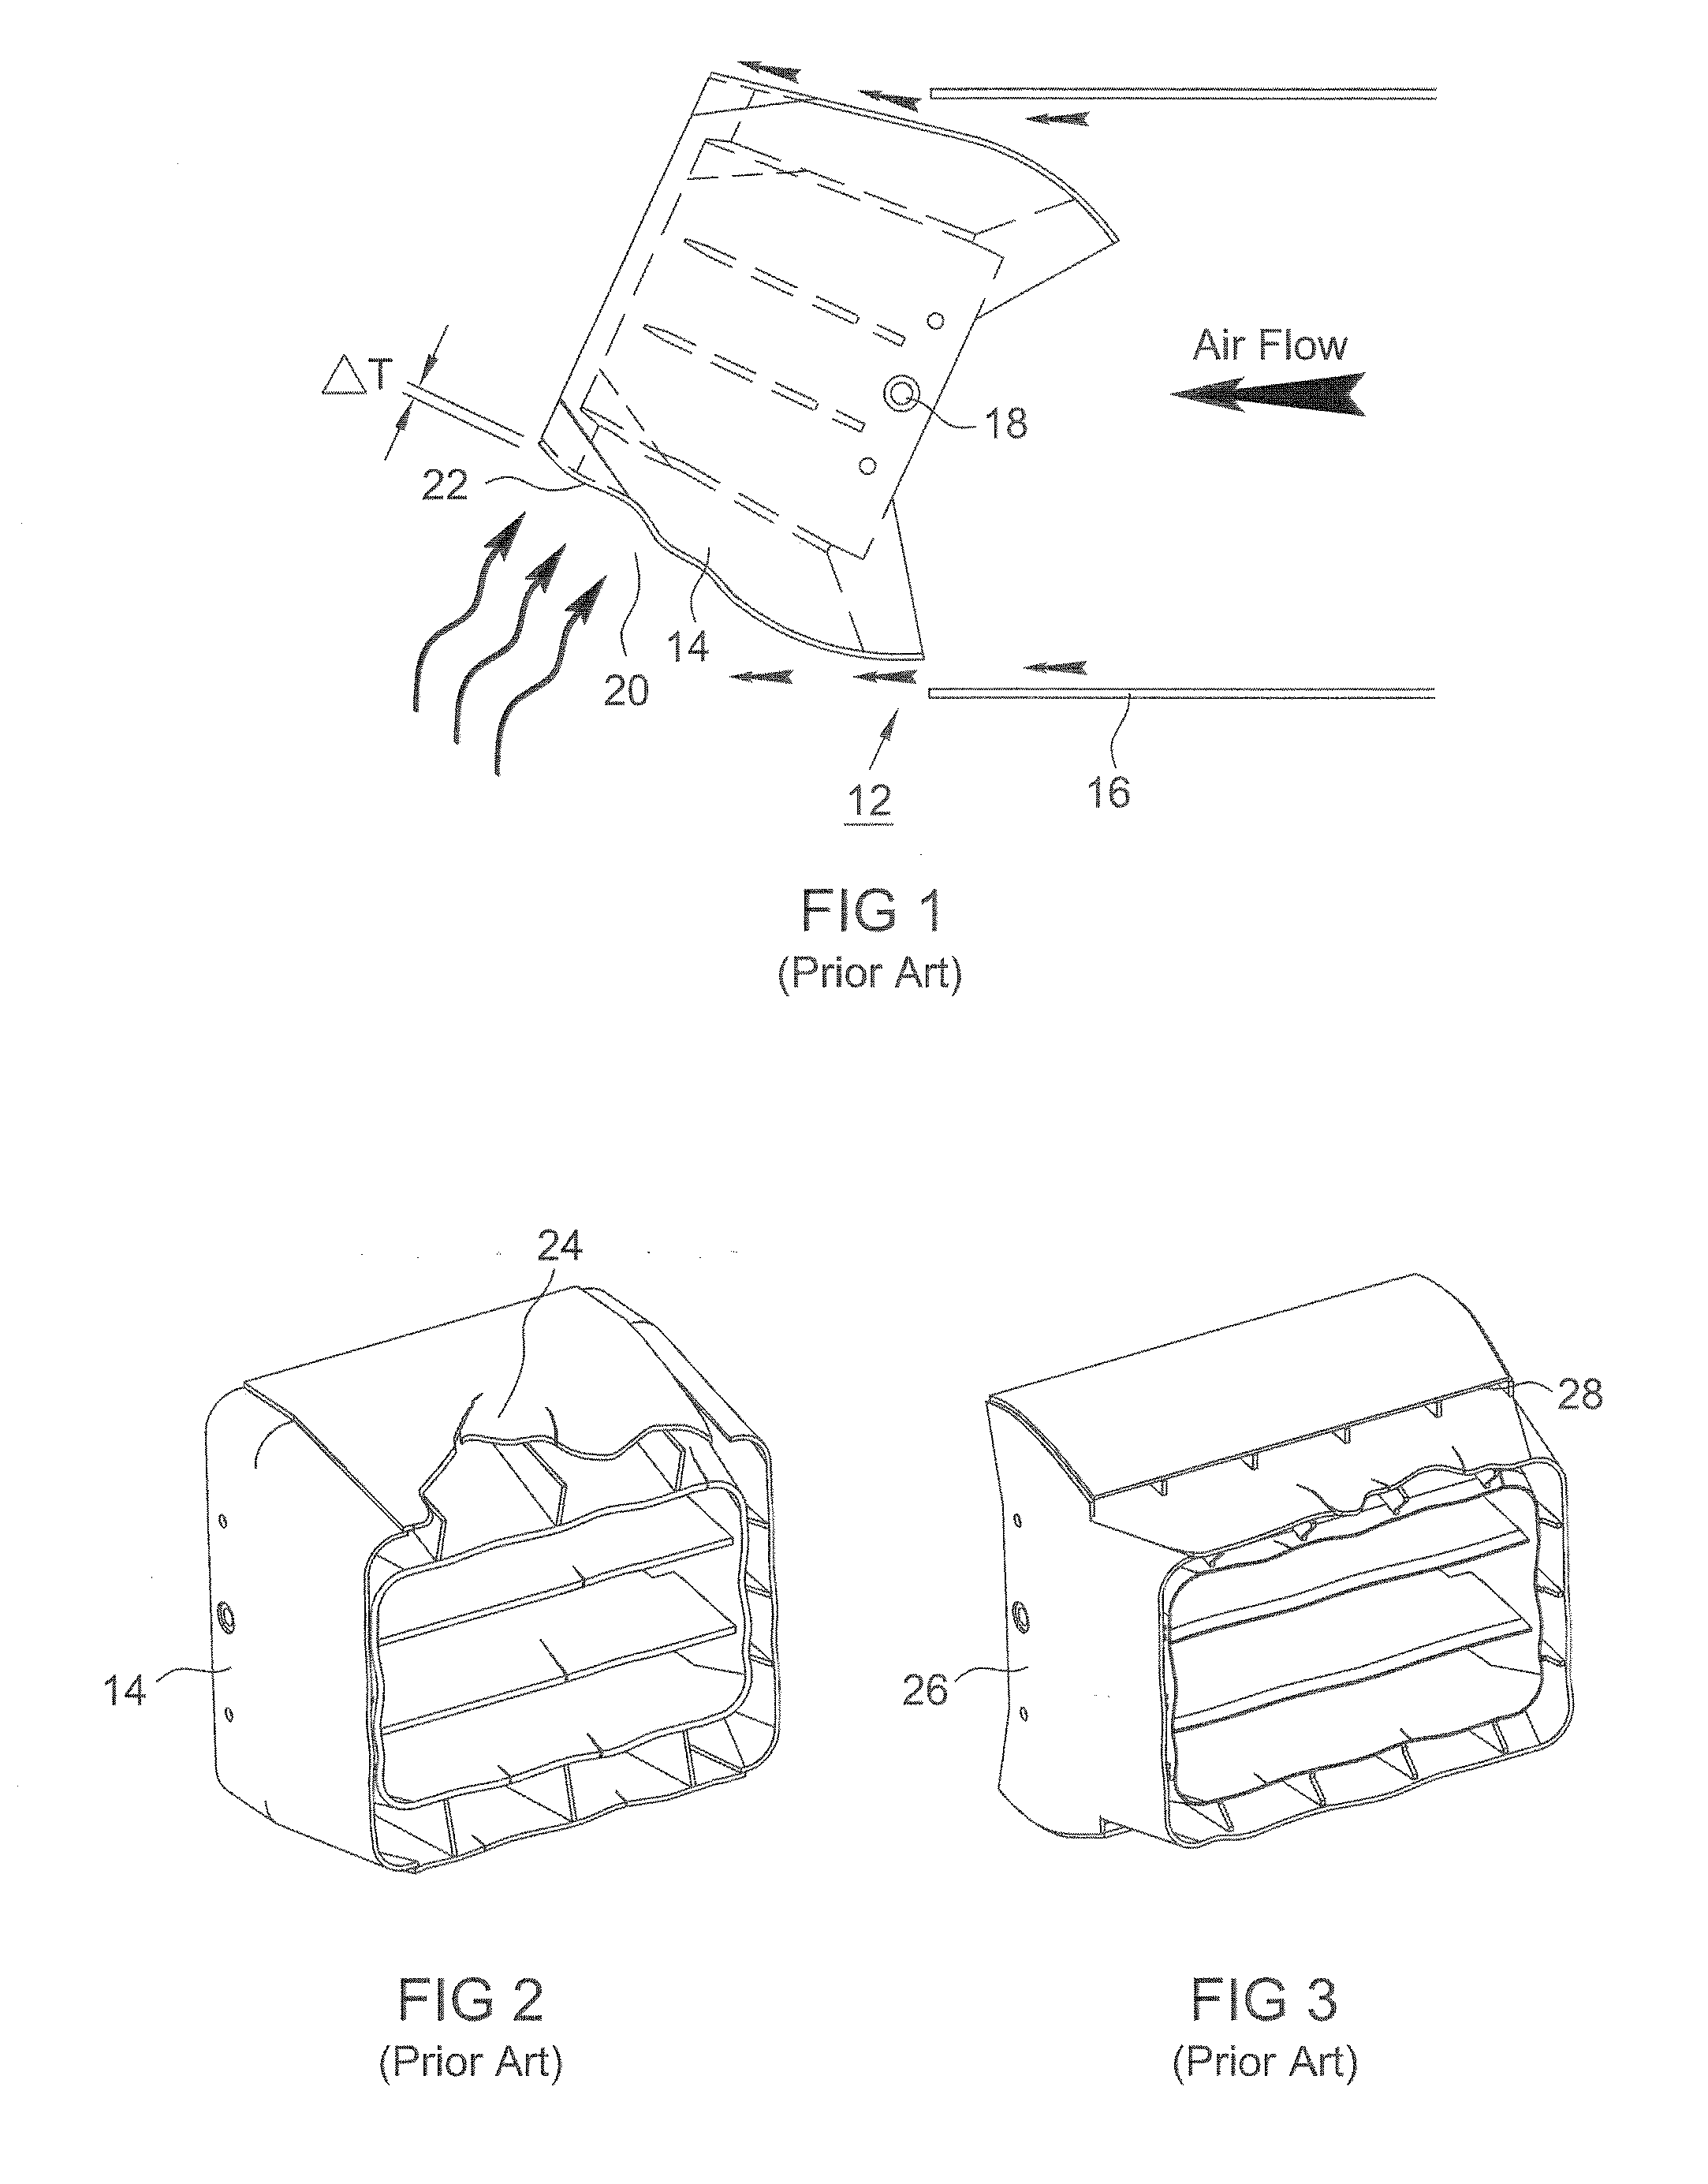 Nozzle for feeding combustion media into a furnace